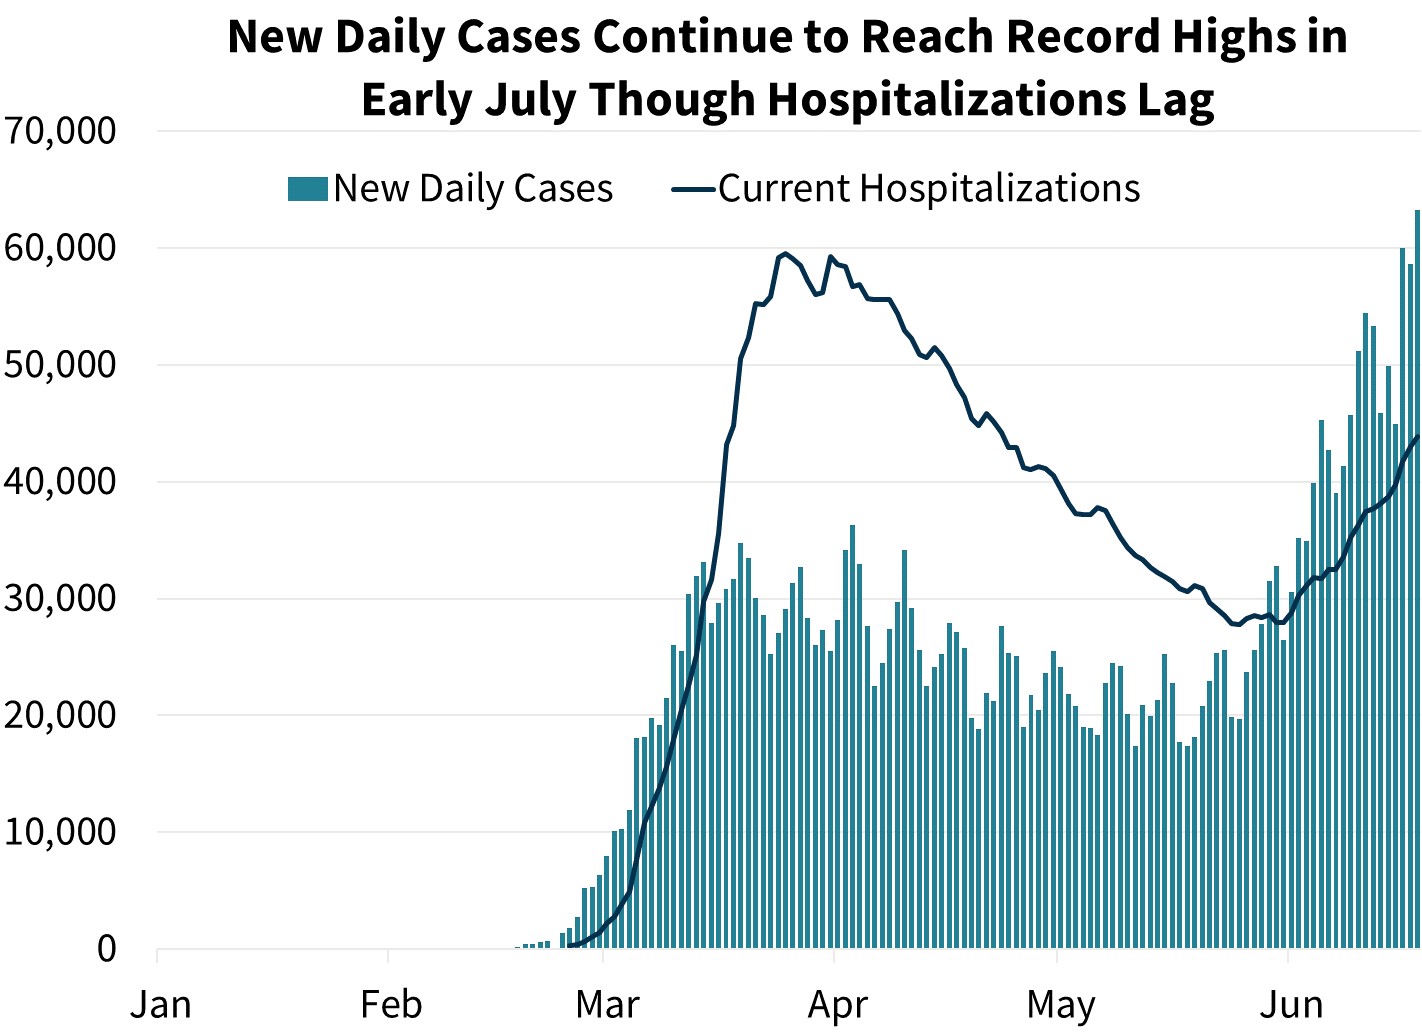 New Daily Cases Continue to Reach Record Highs in Early June Though Hospitalizations Lag